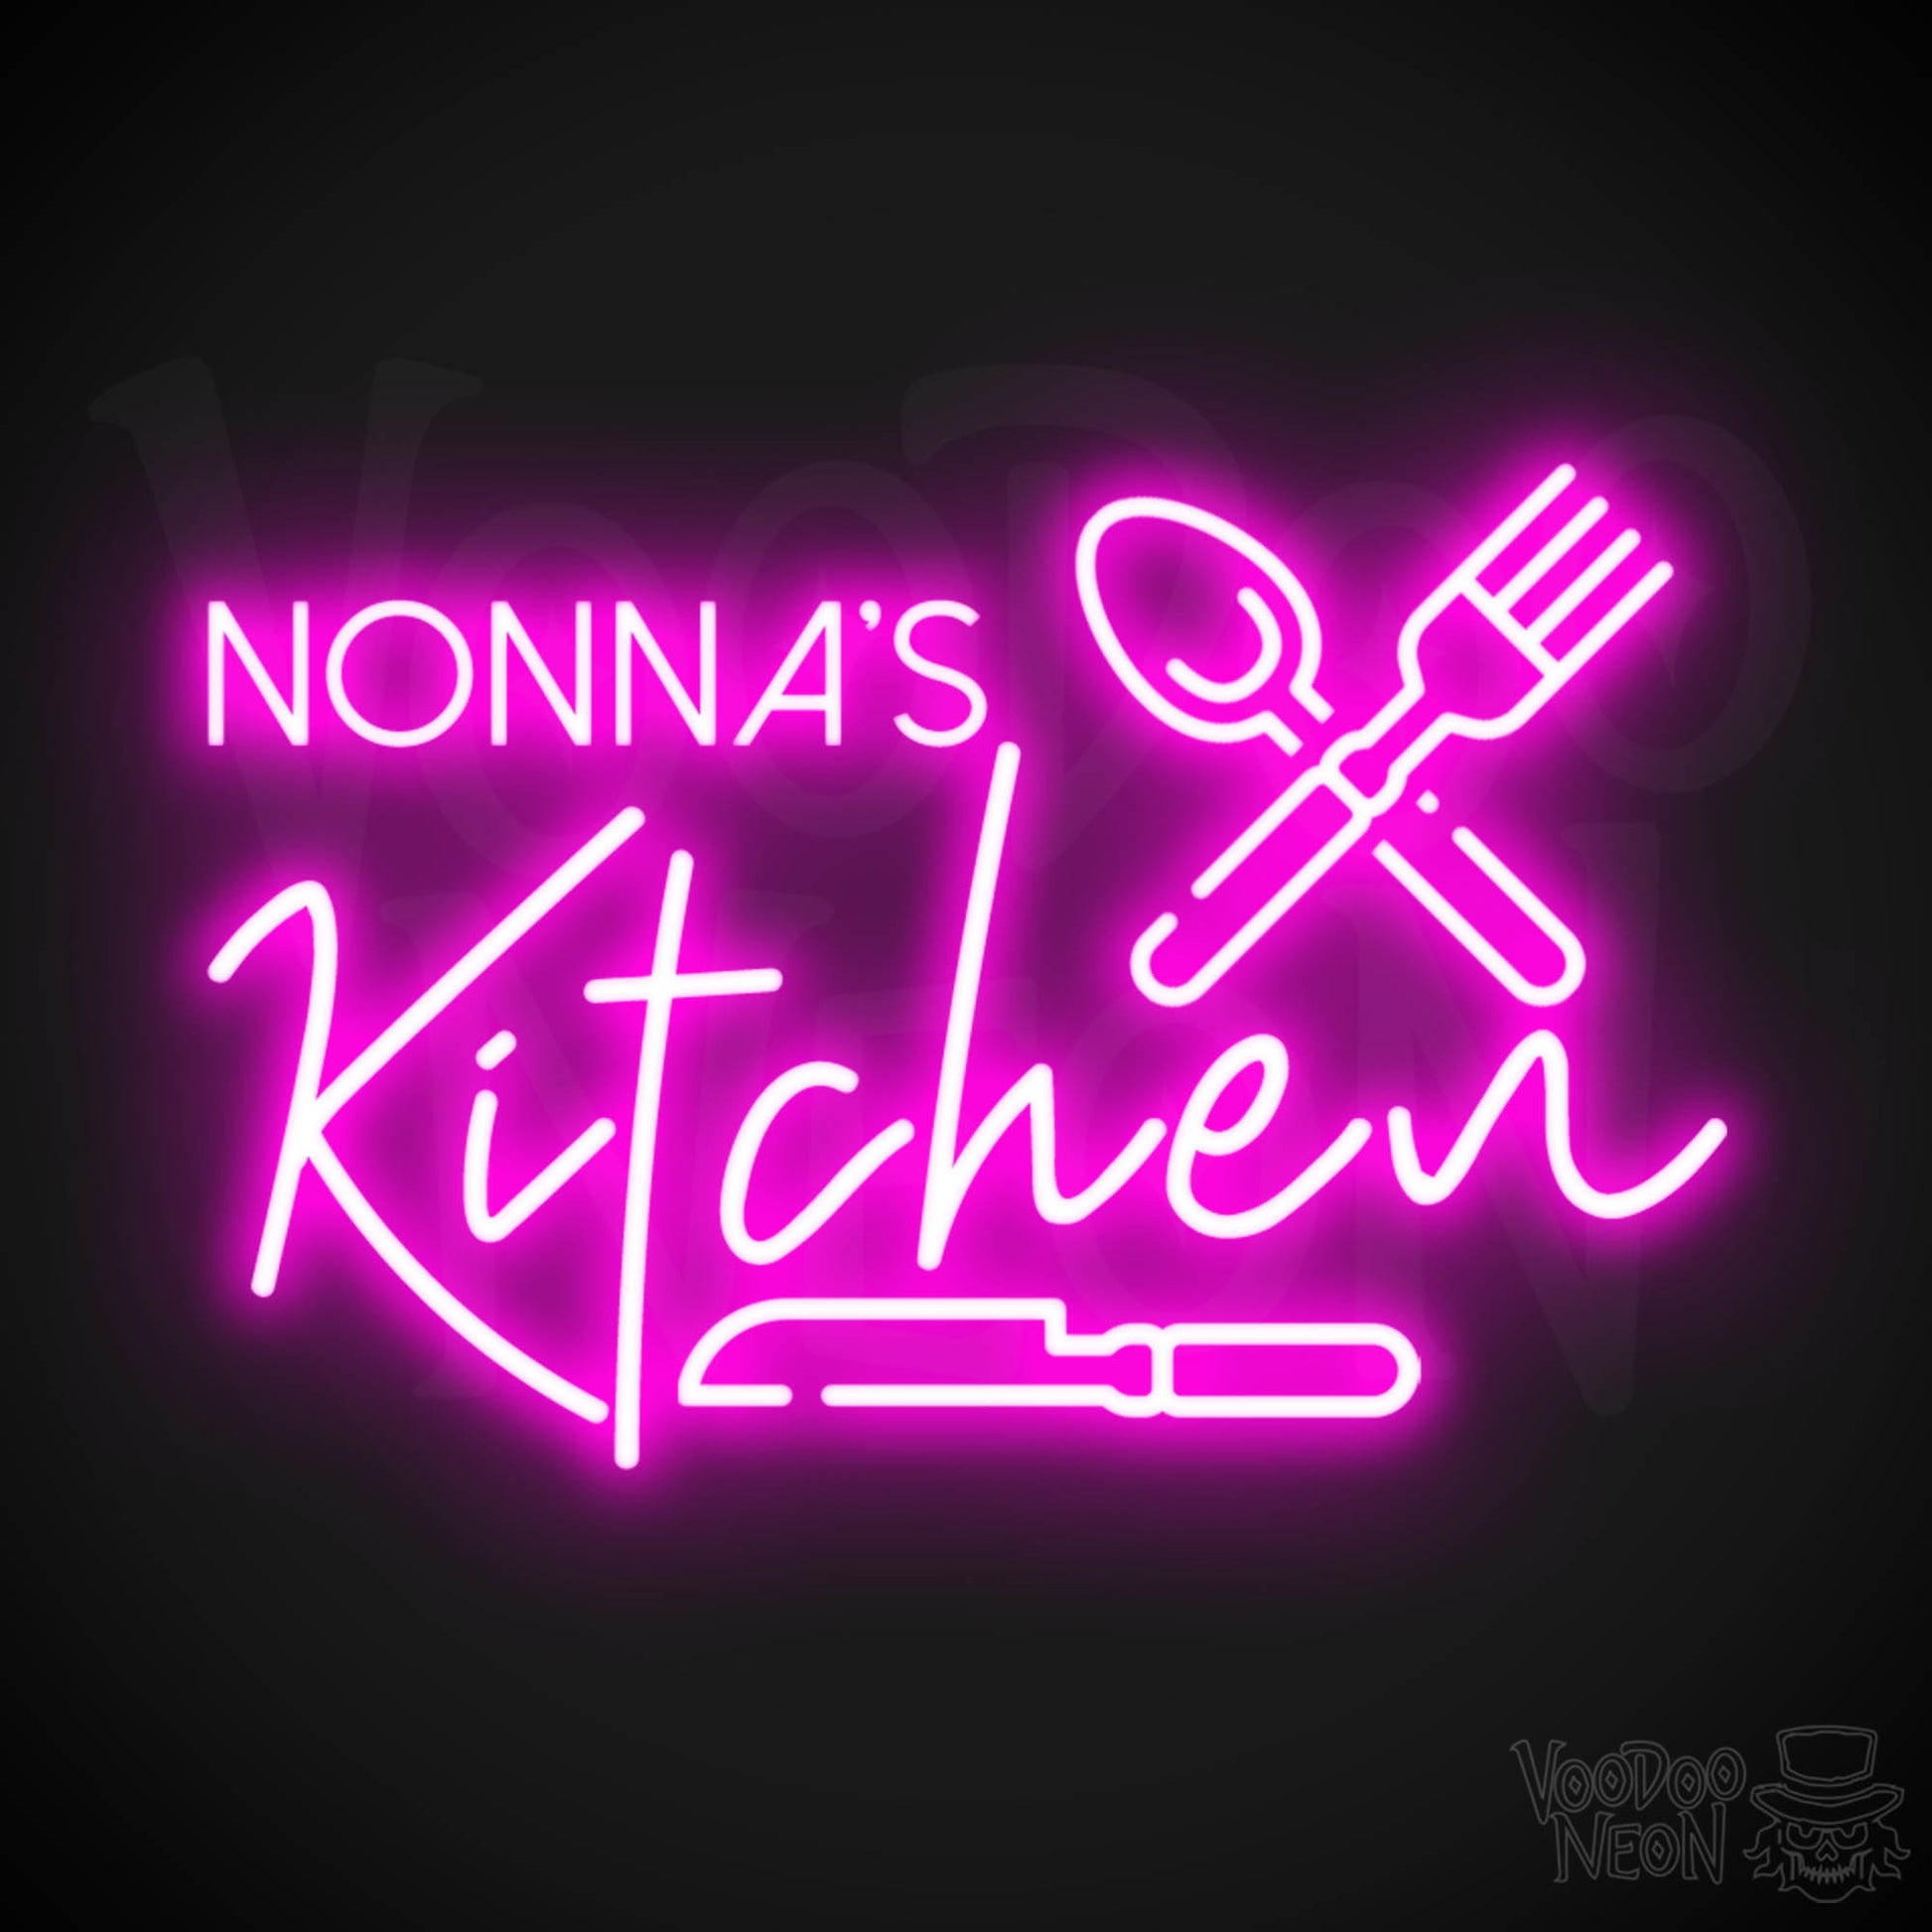 Nonna's Kitchen Neon Sign - Neon Nona's Kitchen Sign - Wall Art - Color Pink